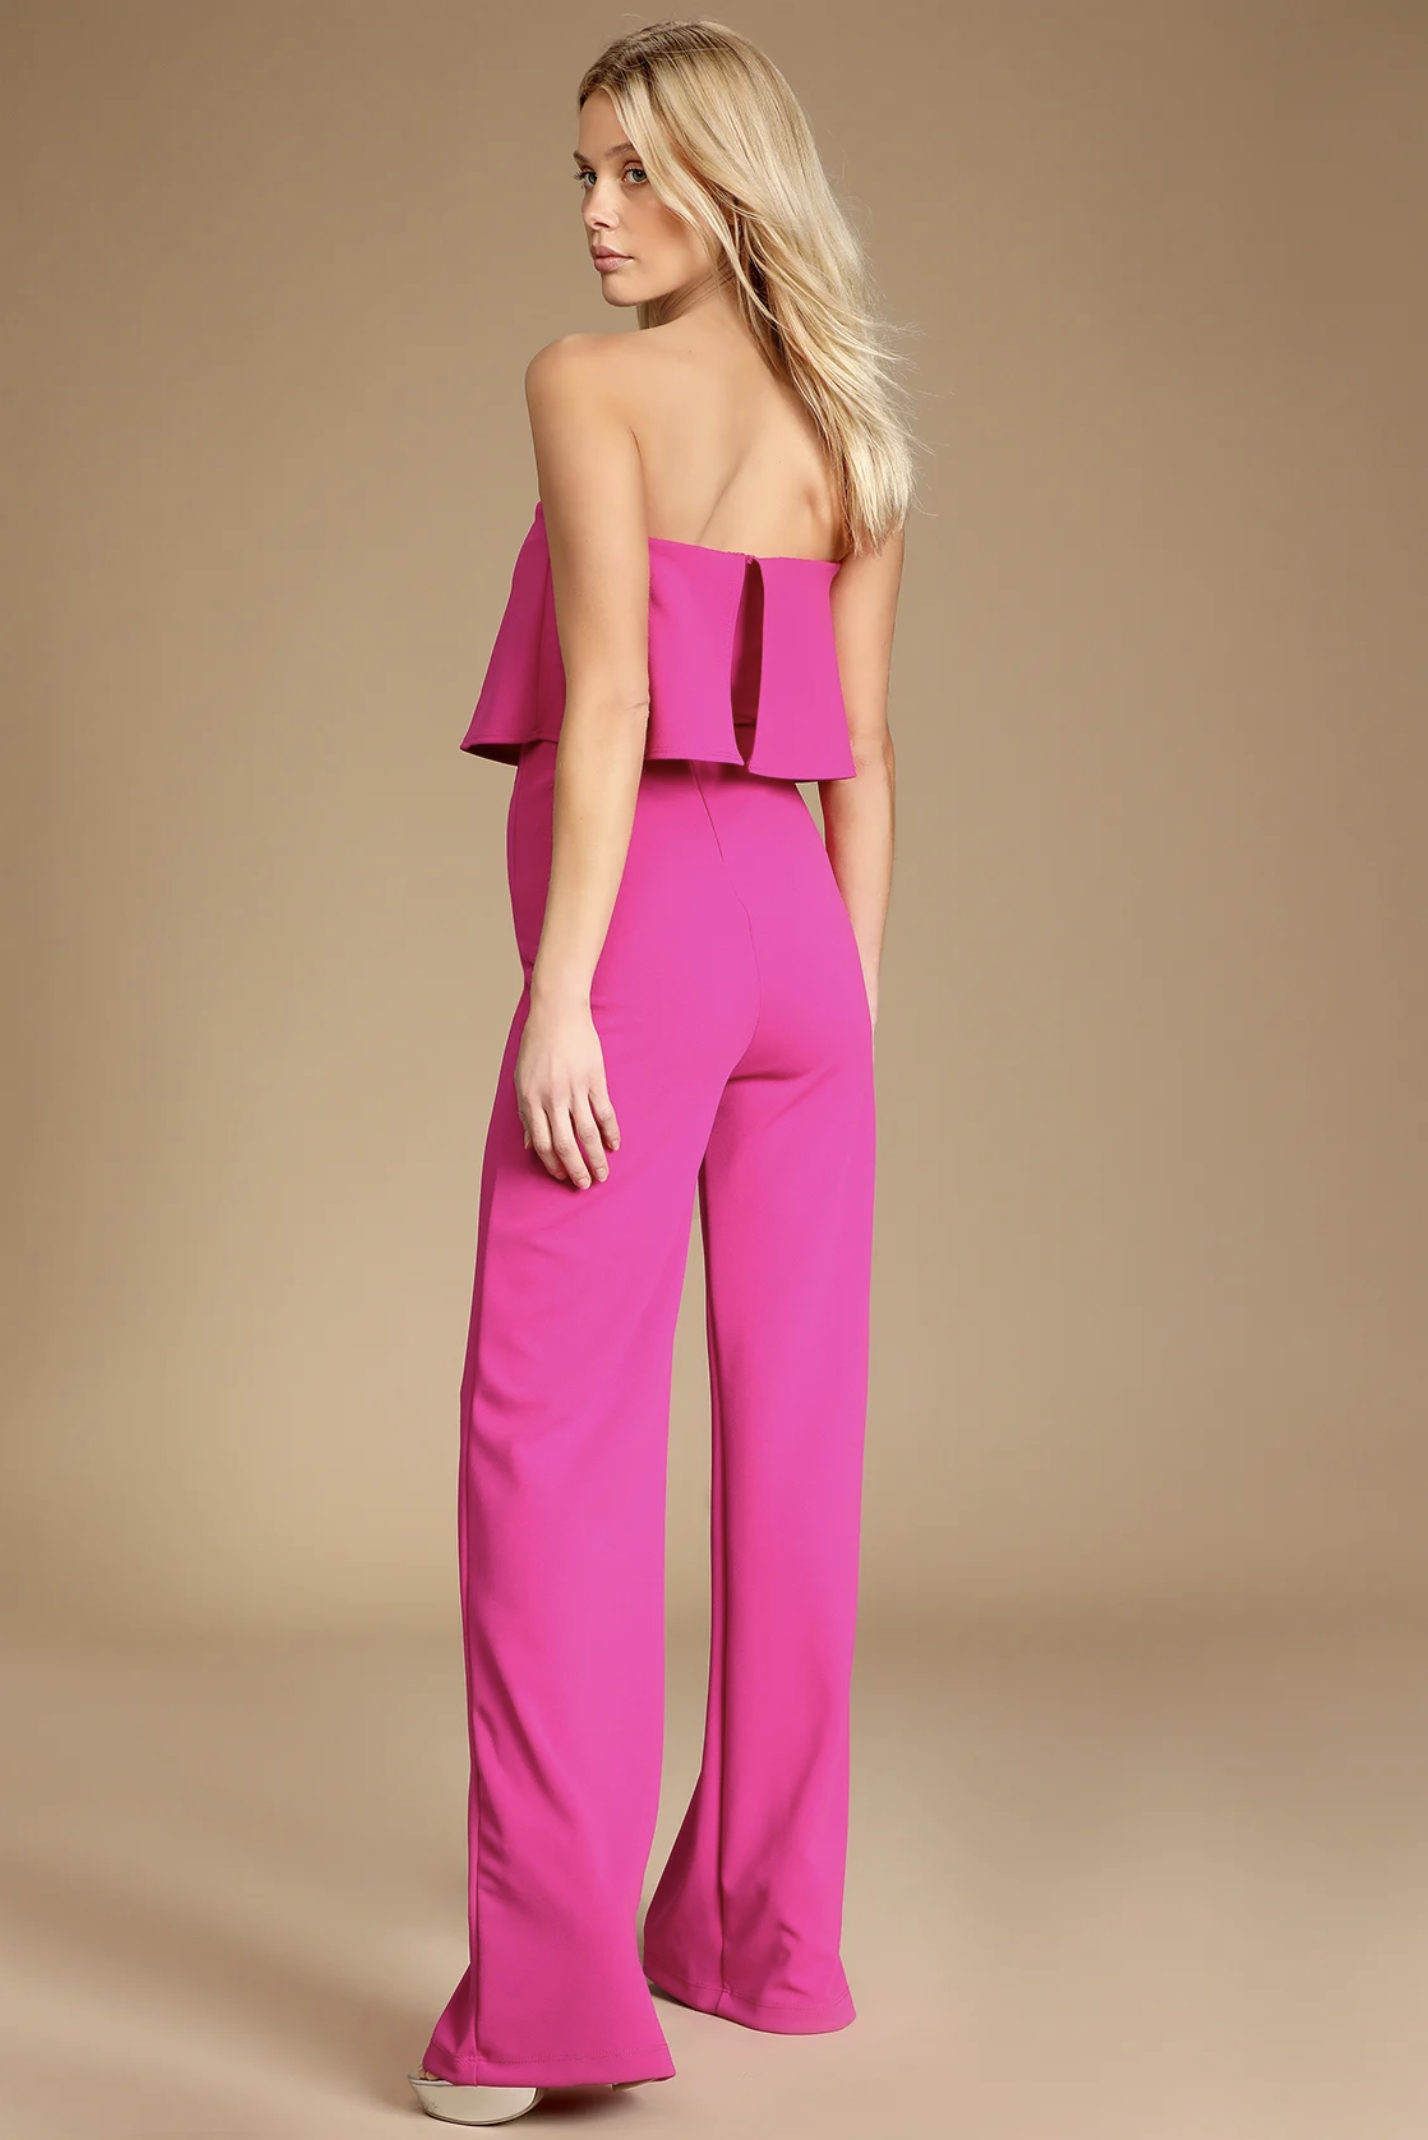 pink wedding guest outfit ideas